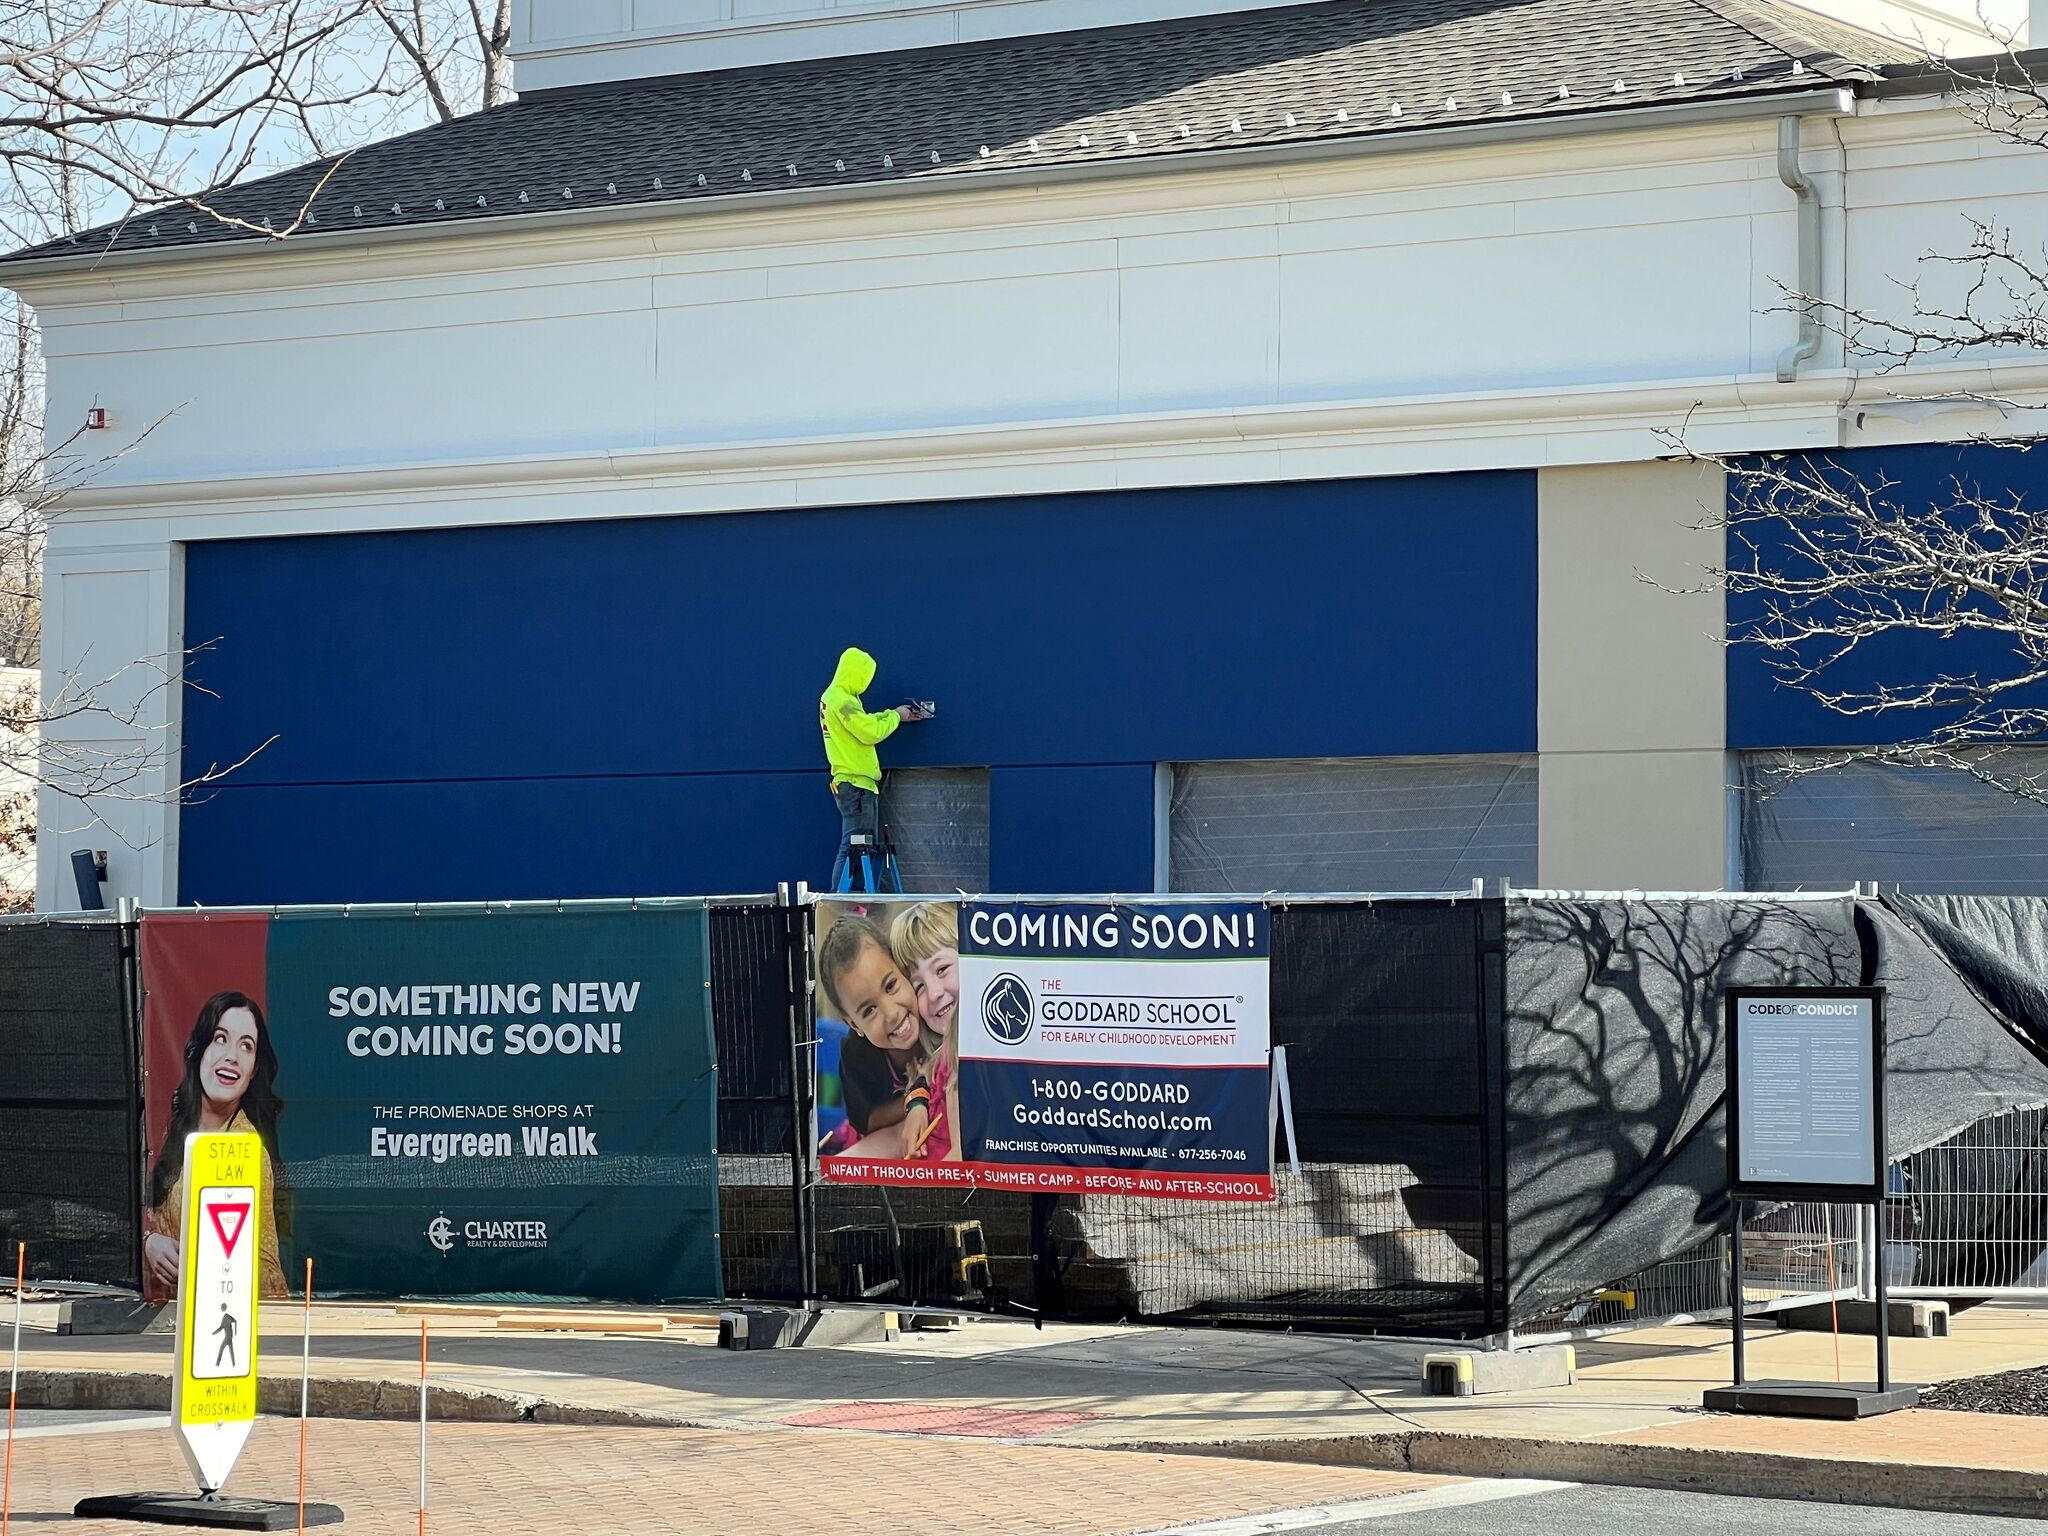 Evergreen Walk retail center in South Windsor continues to add new tenants